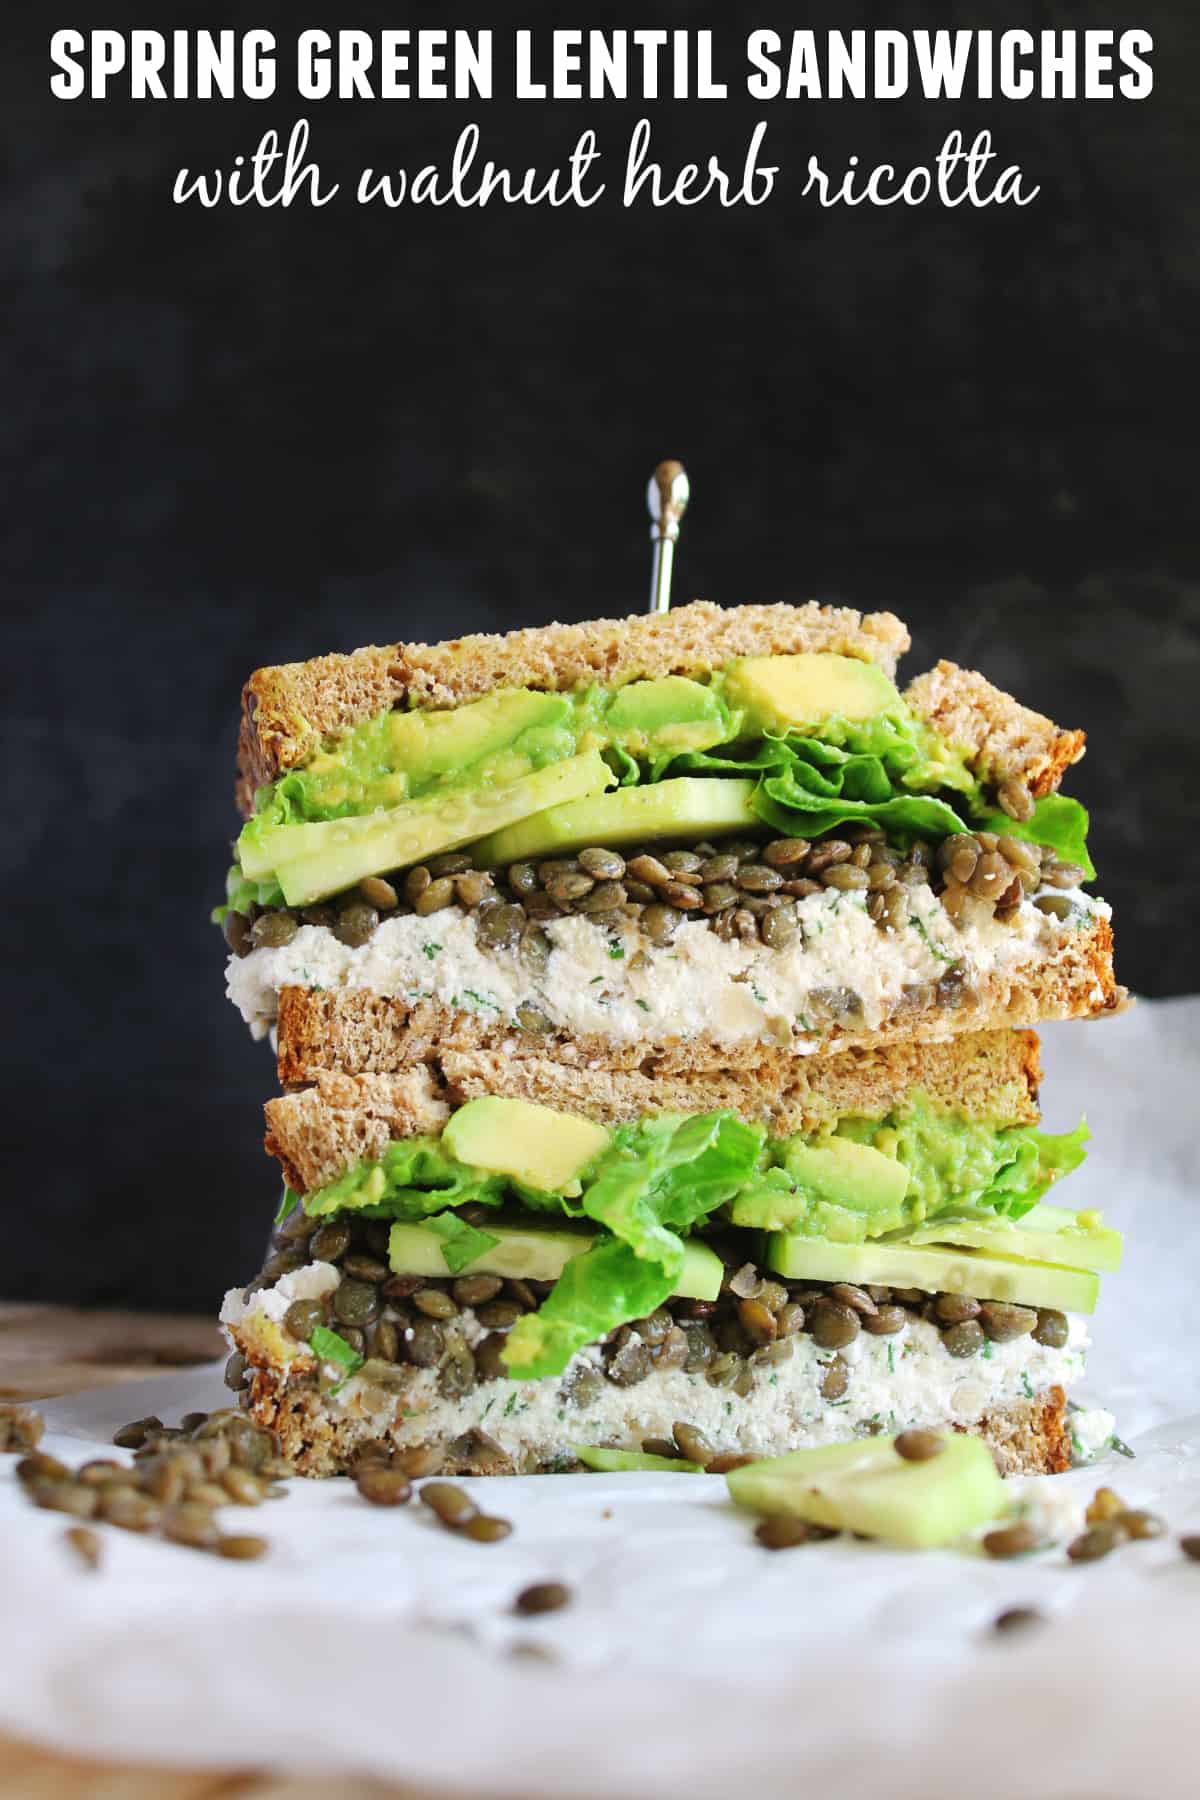 Spring green lentil sandwiches with walnut herb ricotta recipe! Delicious, vegetarian sandwiches with french green lentils, cucumber, avocado, and a walnutty herby ricotta cheese. SOOOO GOOD!